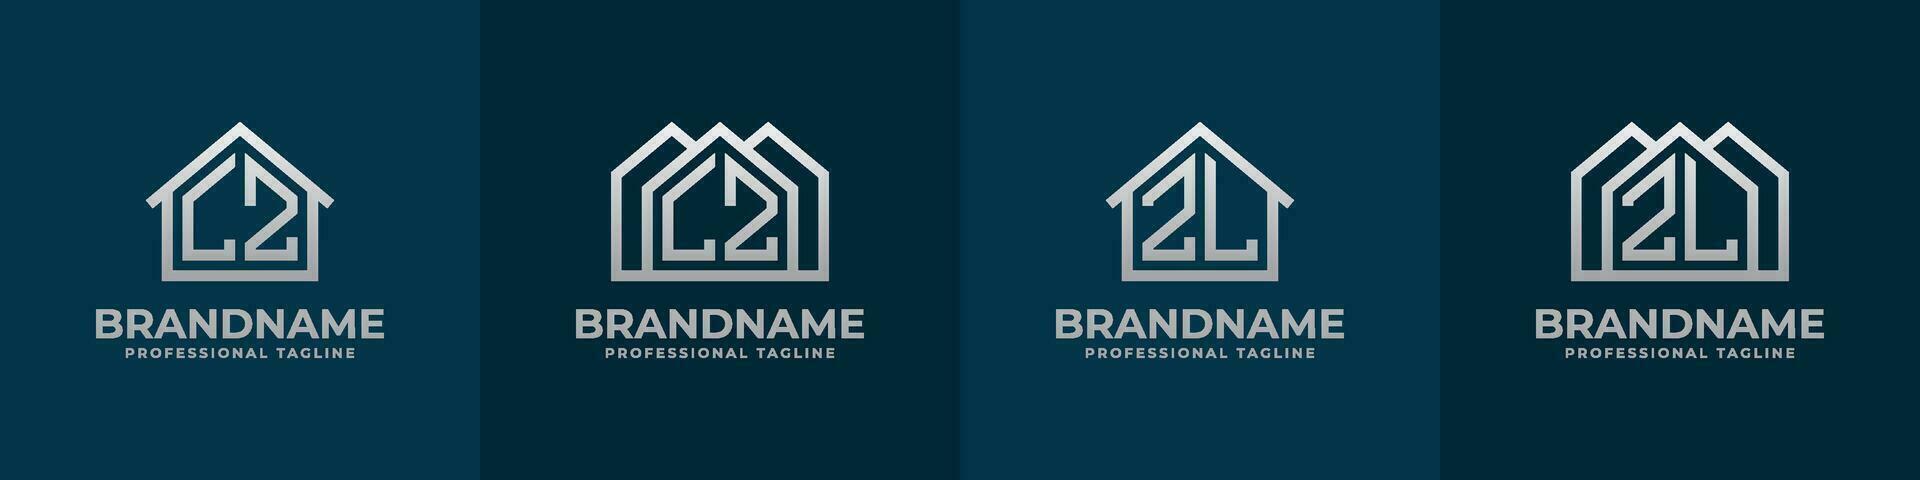 Letter LZ and ZL Home Logo Set. Suitable for any business related to house, real estate, construction, interior with LZ or ZL initials. vector